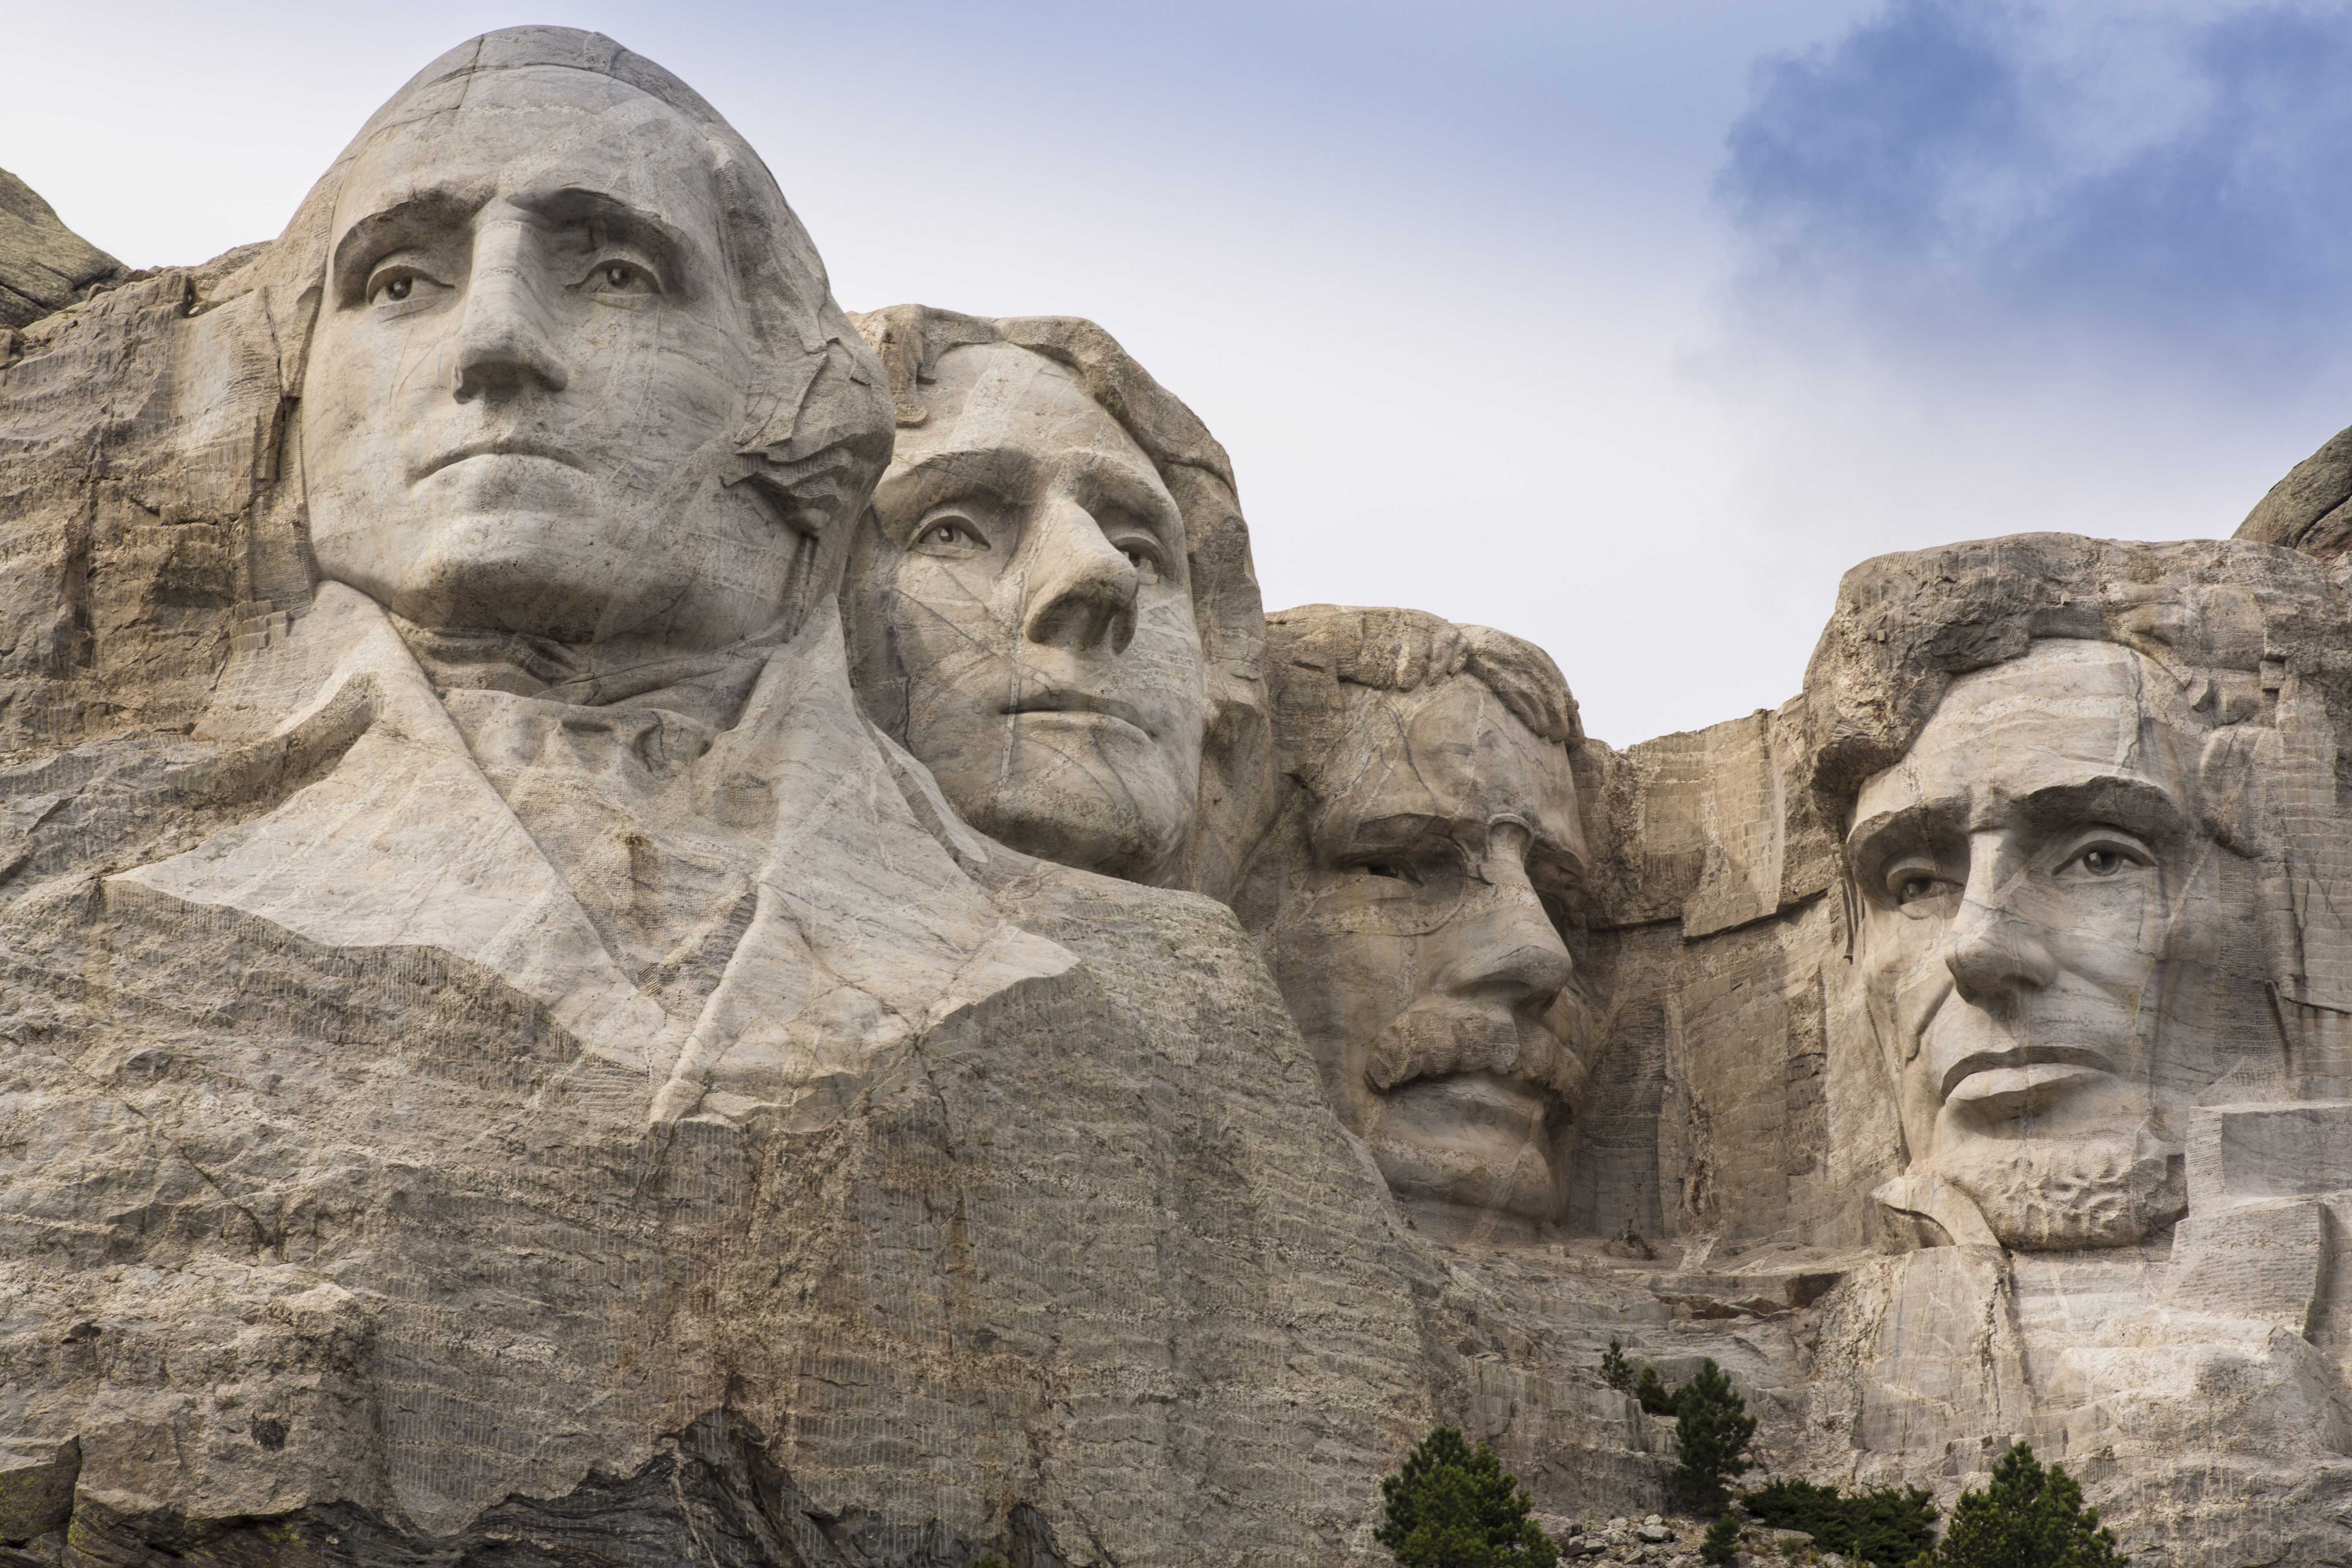 You are currently viewing Mount Rushmore National Memorial